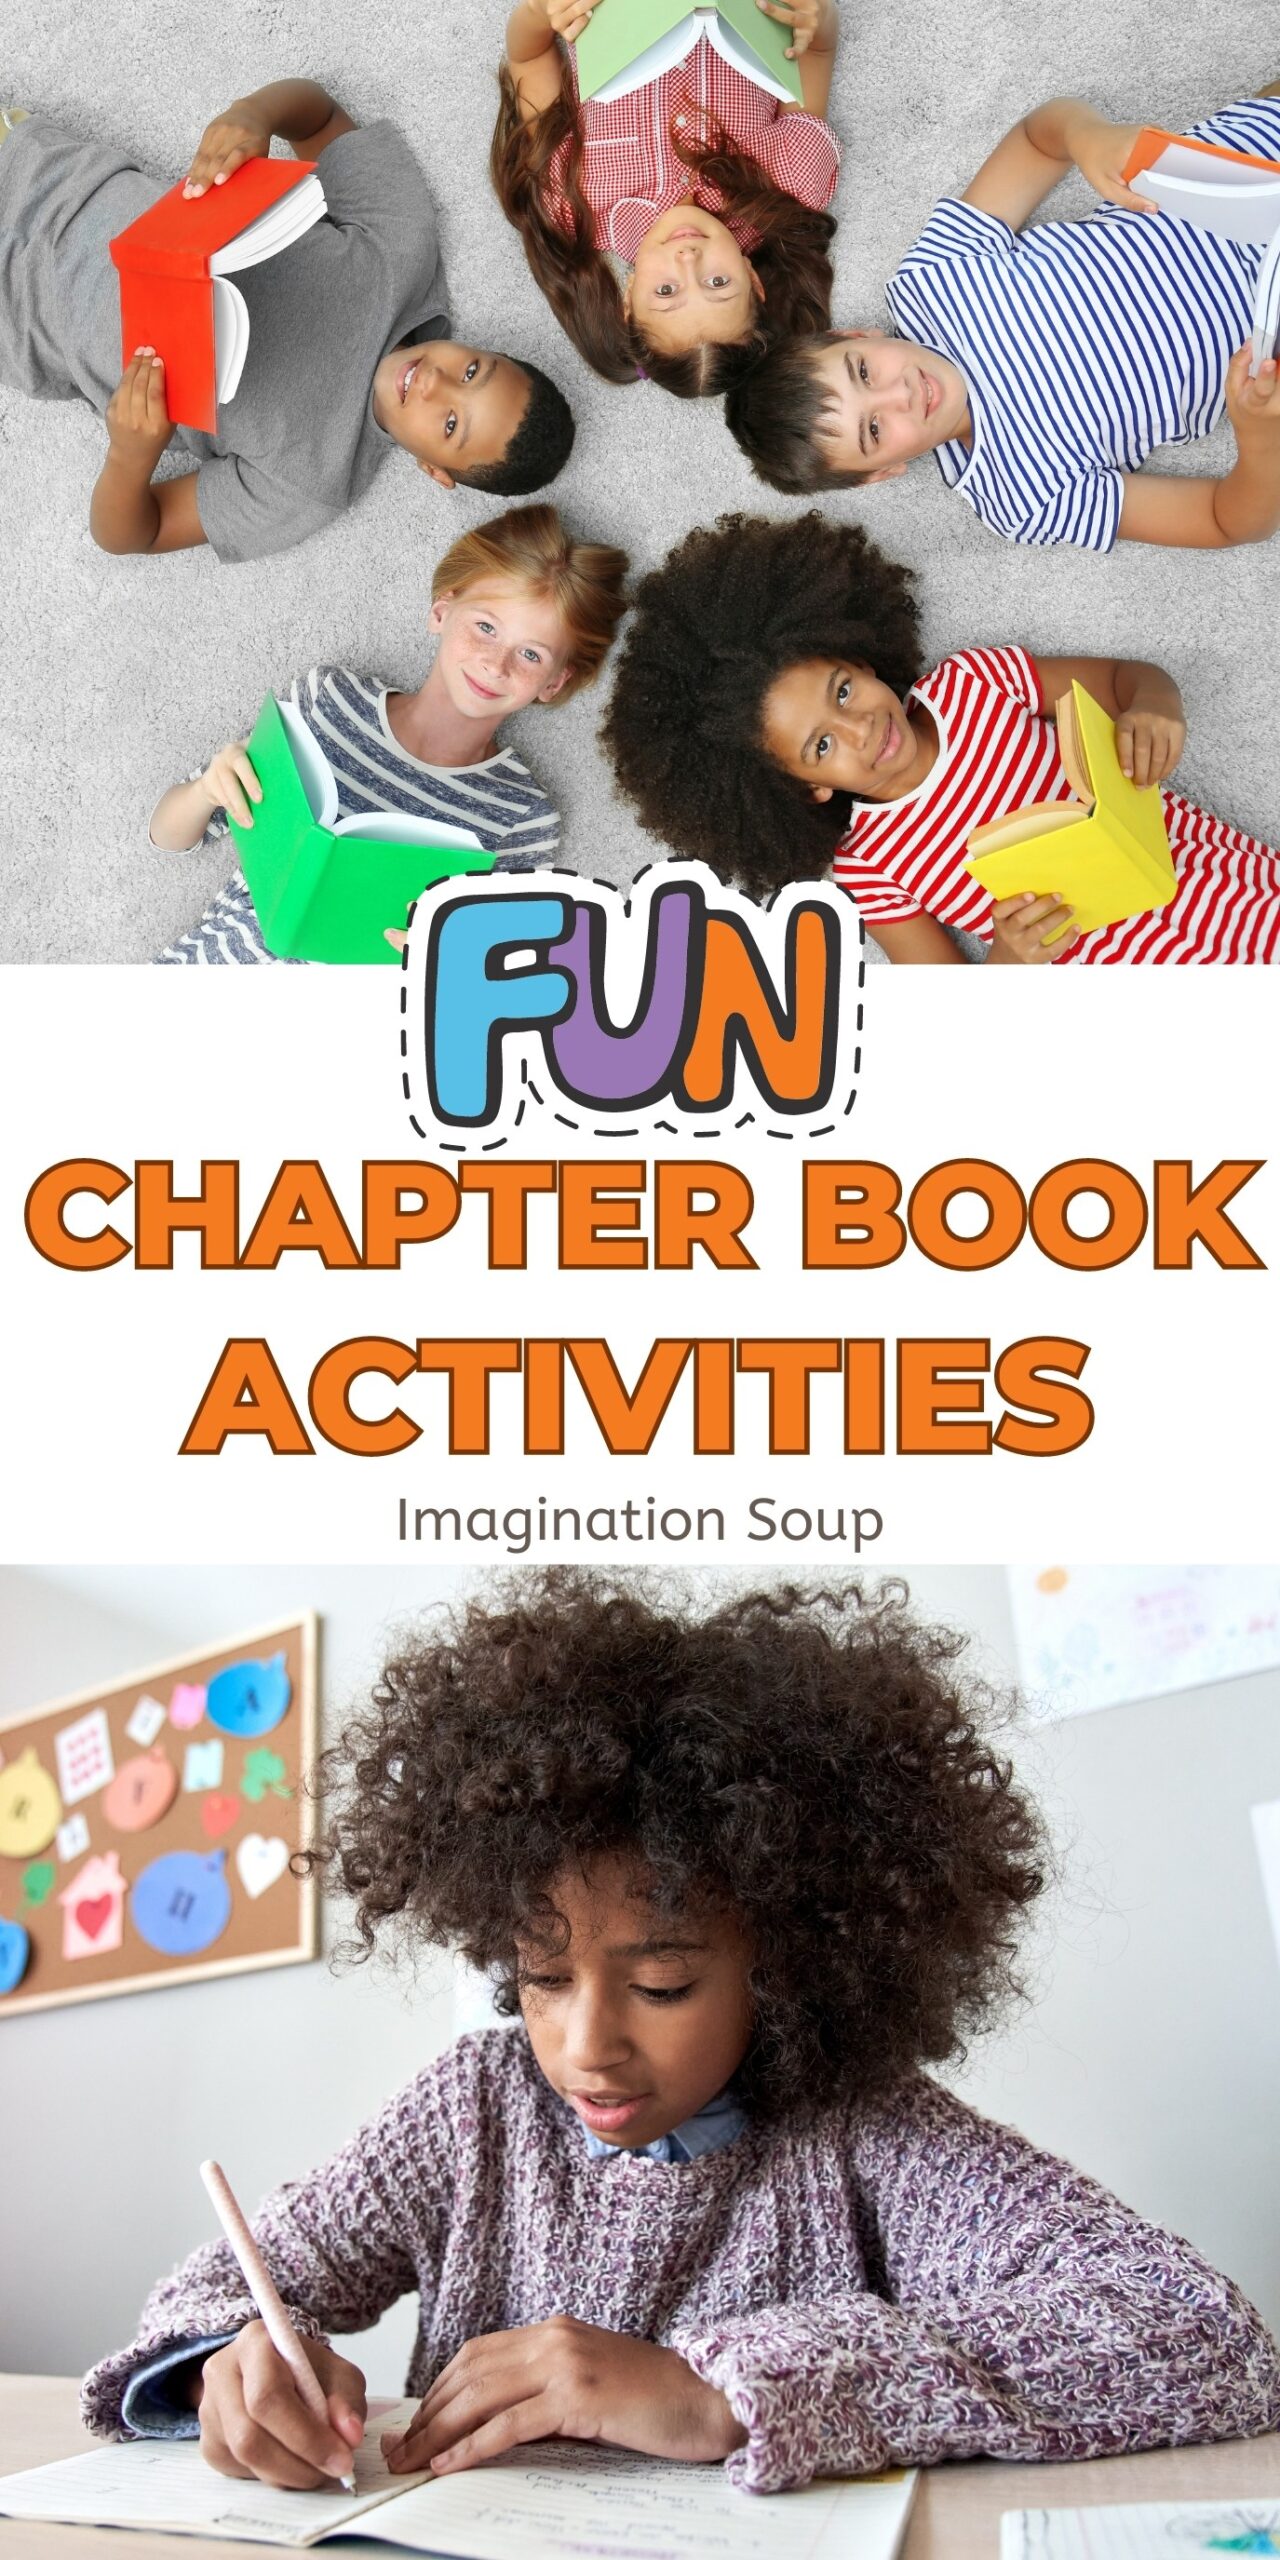 Have you ever heard of story stretchers? They are chapter book activities that go along with books. Activities like story stretchers are usually associated with picture books, but they don’t end there! You can extend the stories of chapter books, too. Incorporate chapter book activities to make reading more dynamic for your growing readers. 